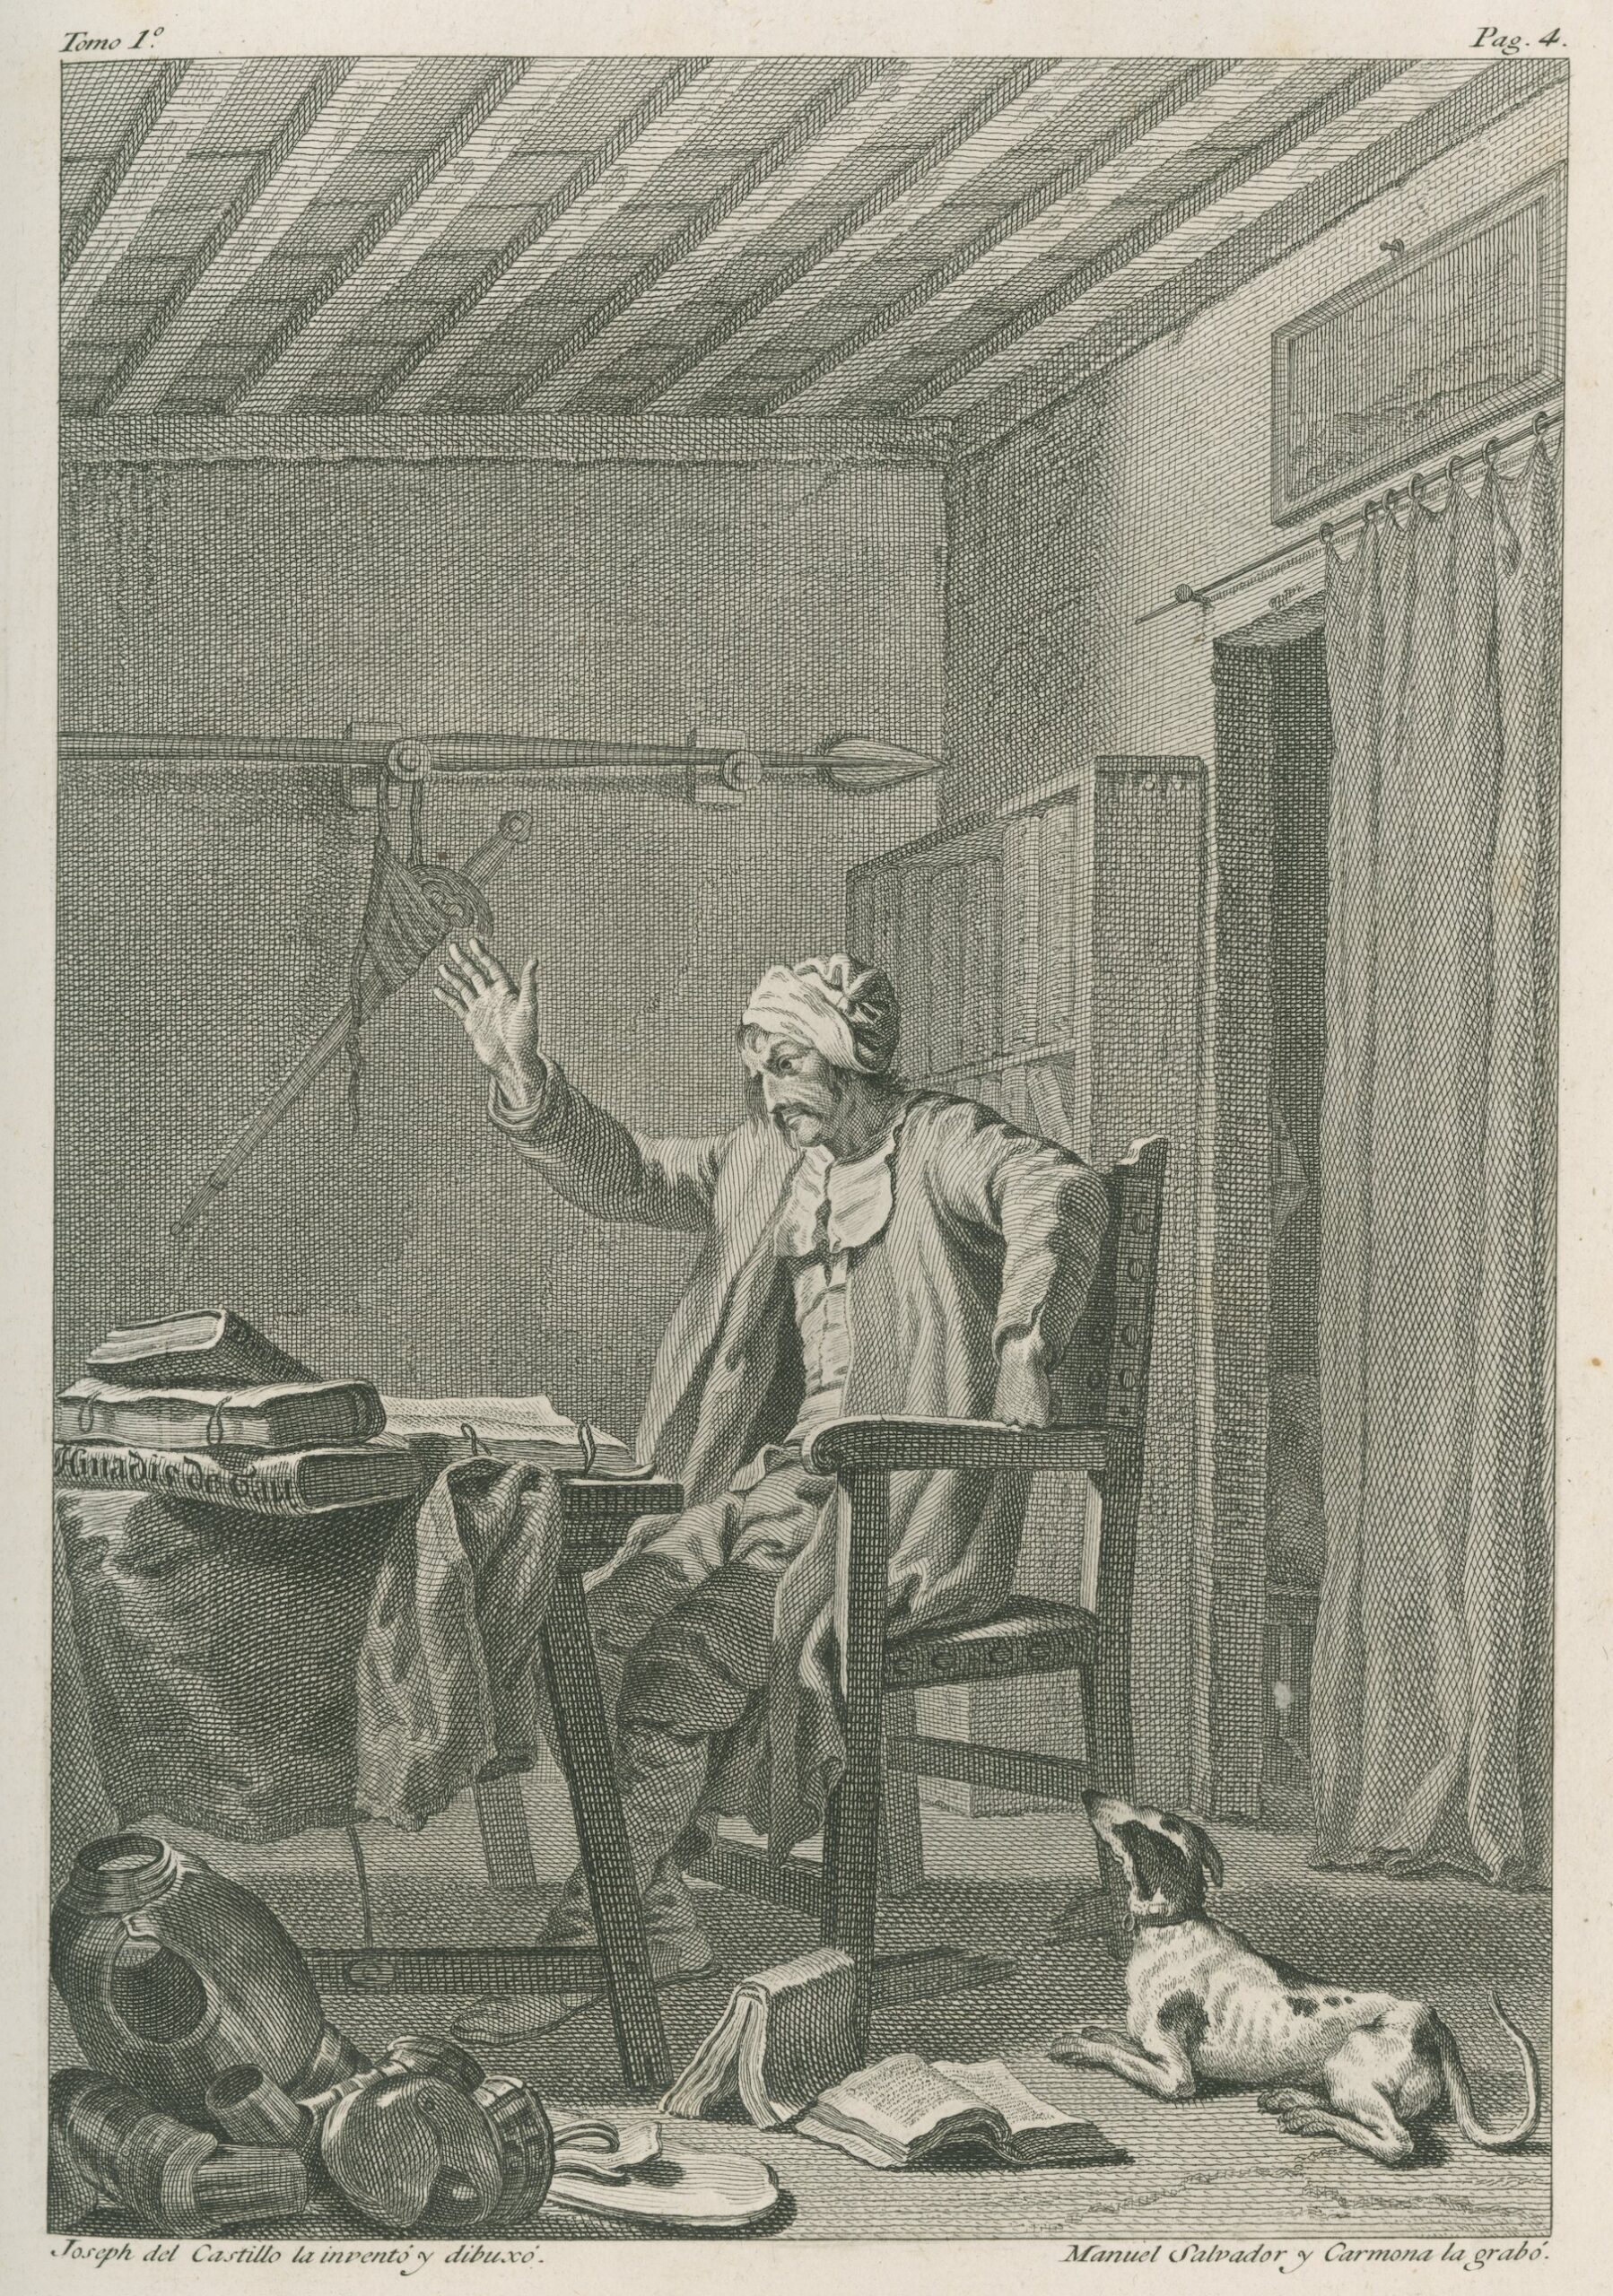 Lithograph image of a man sitting at a desk in an untidy room, with one hand raised and a determined look on his face.